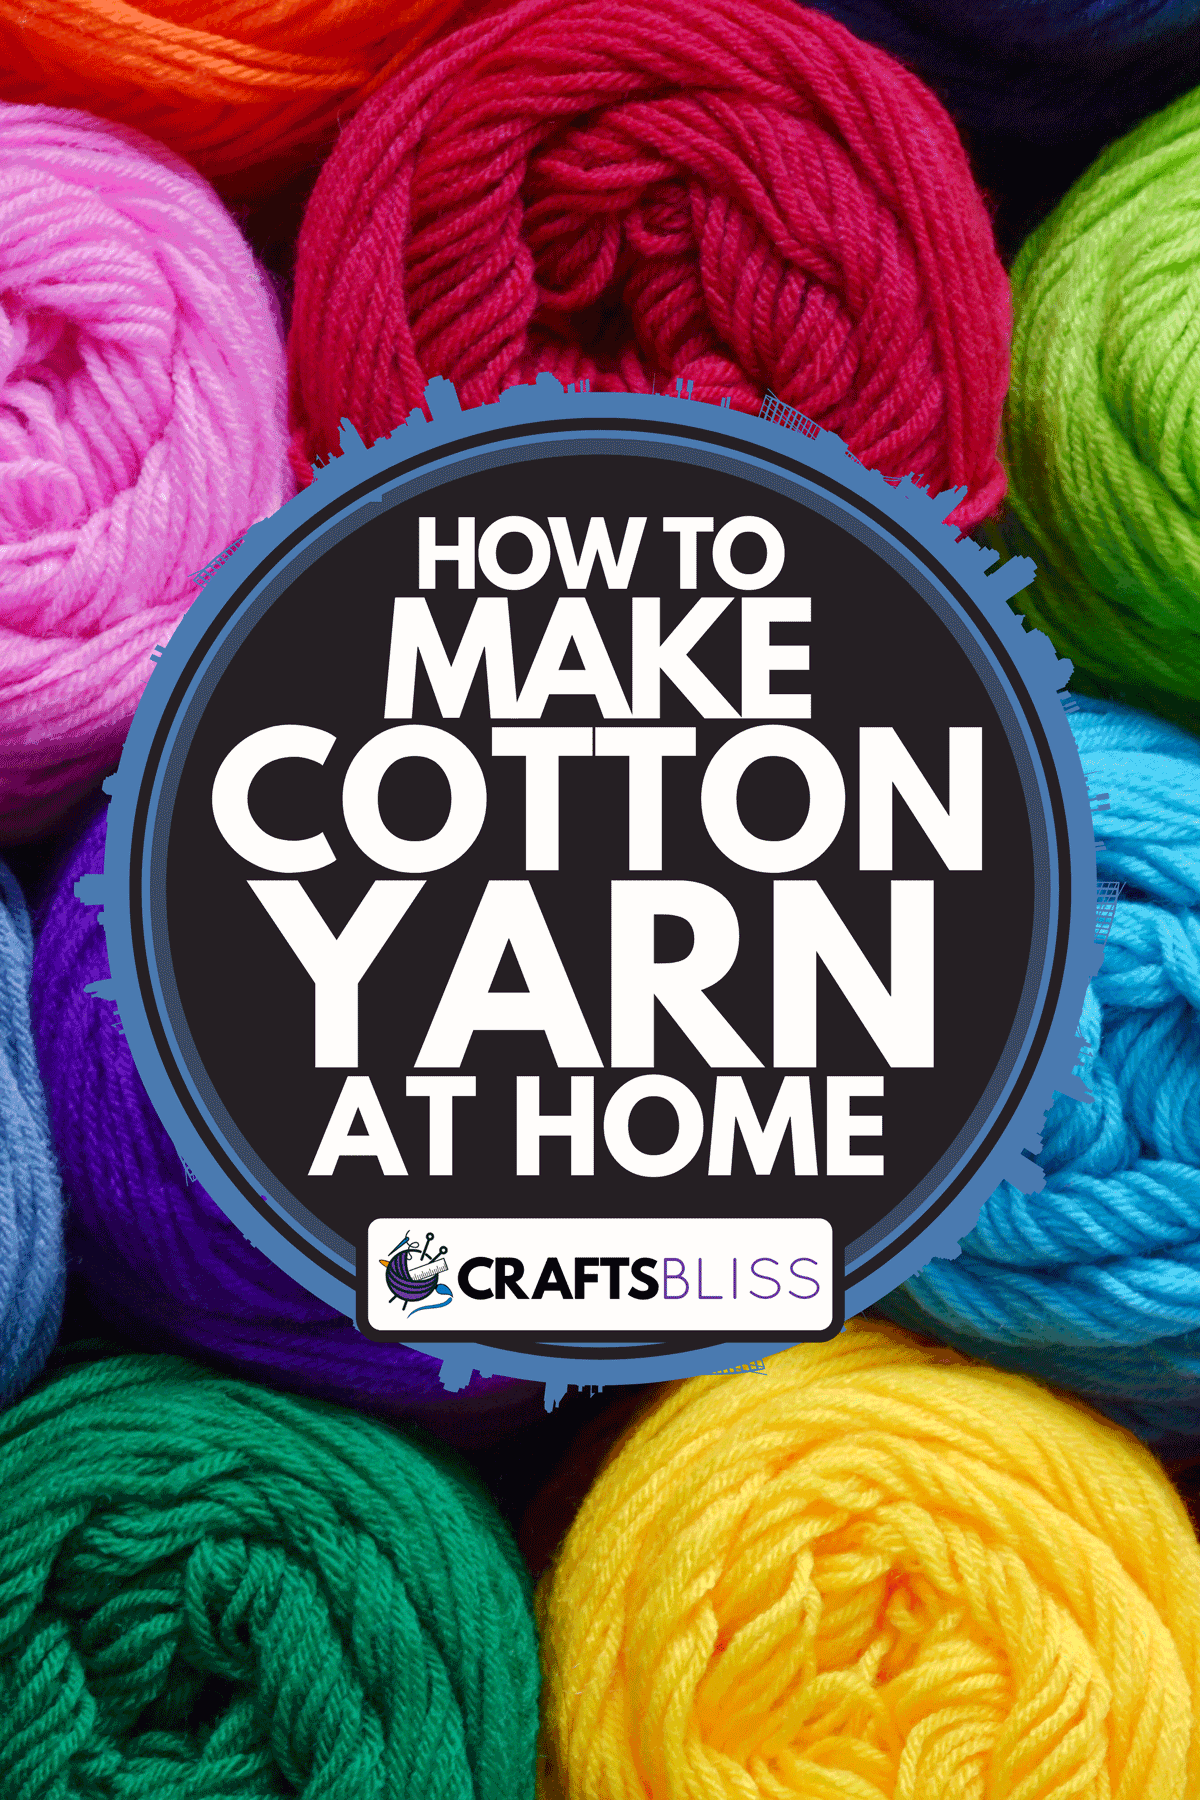 A colorful knitting yarn, How To Make Cotton Yarn At Home